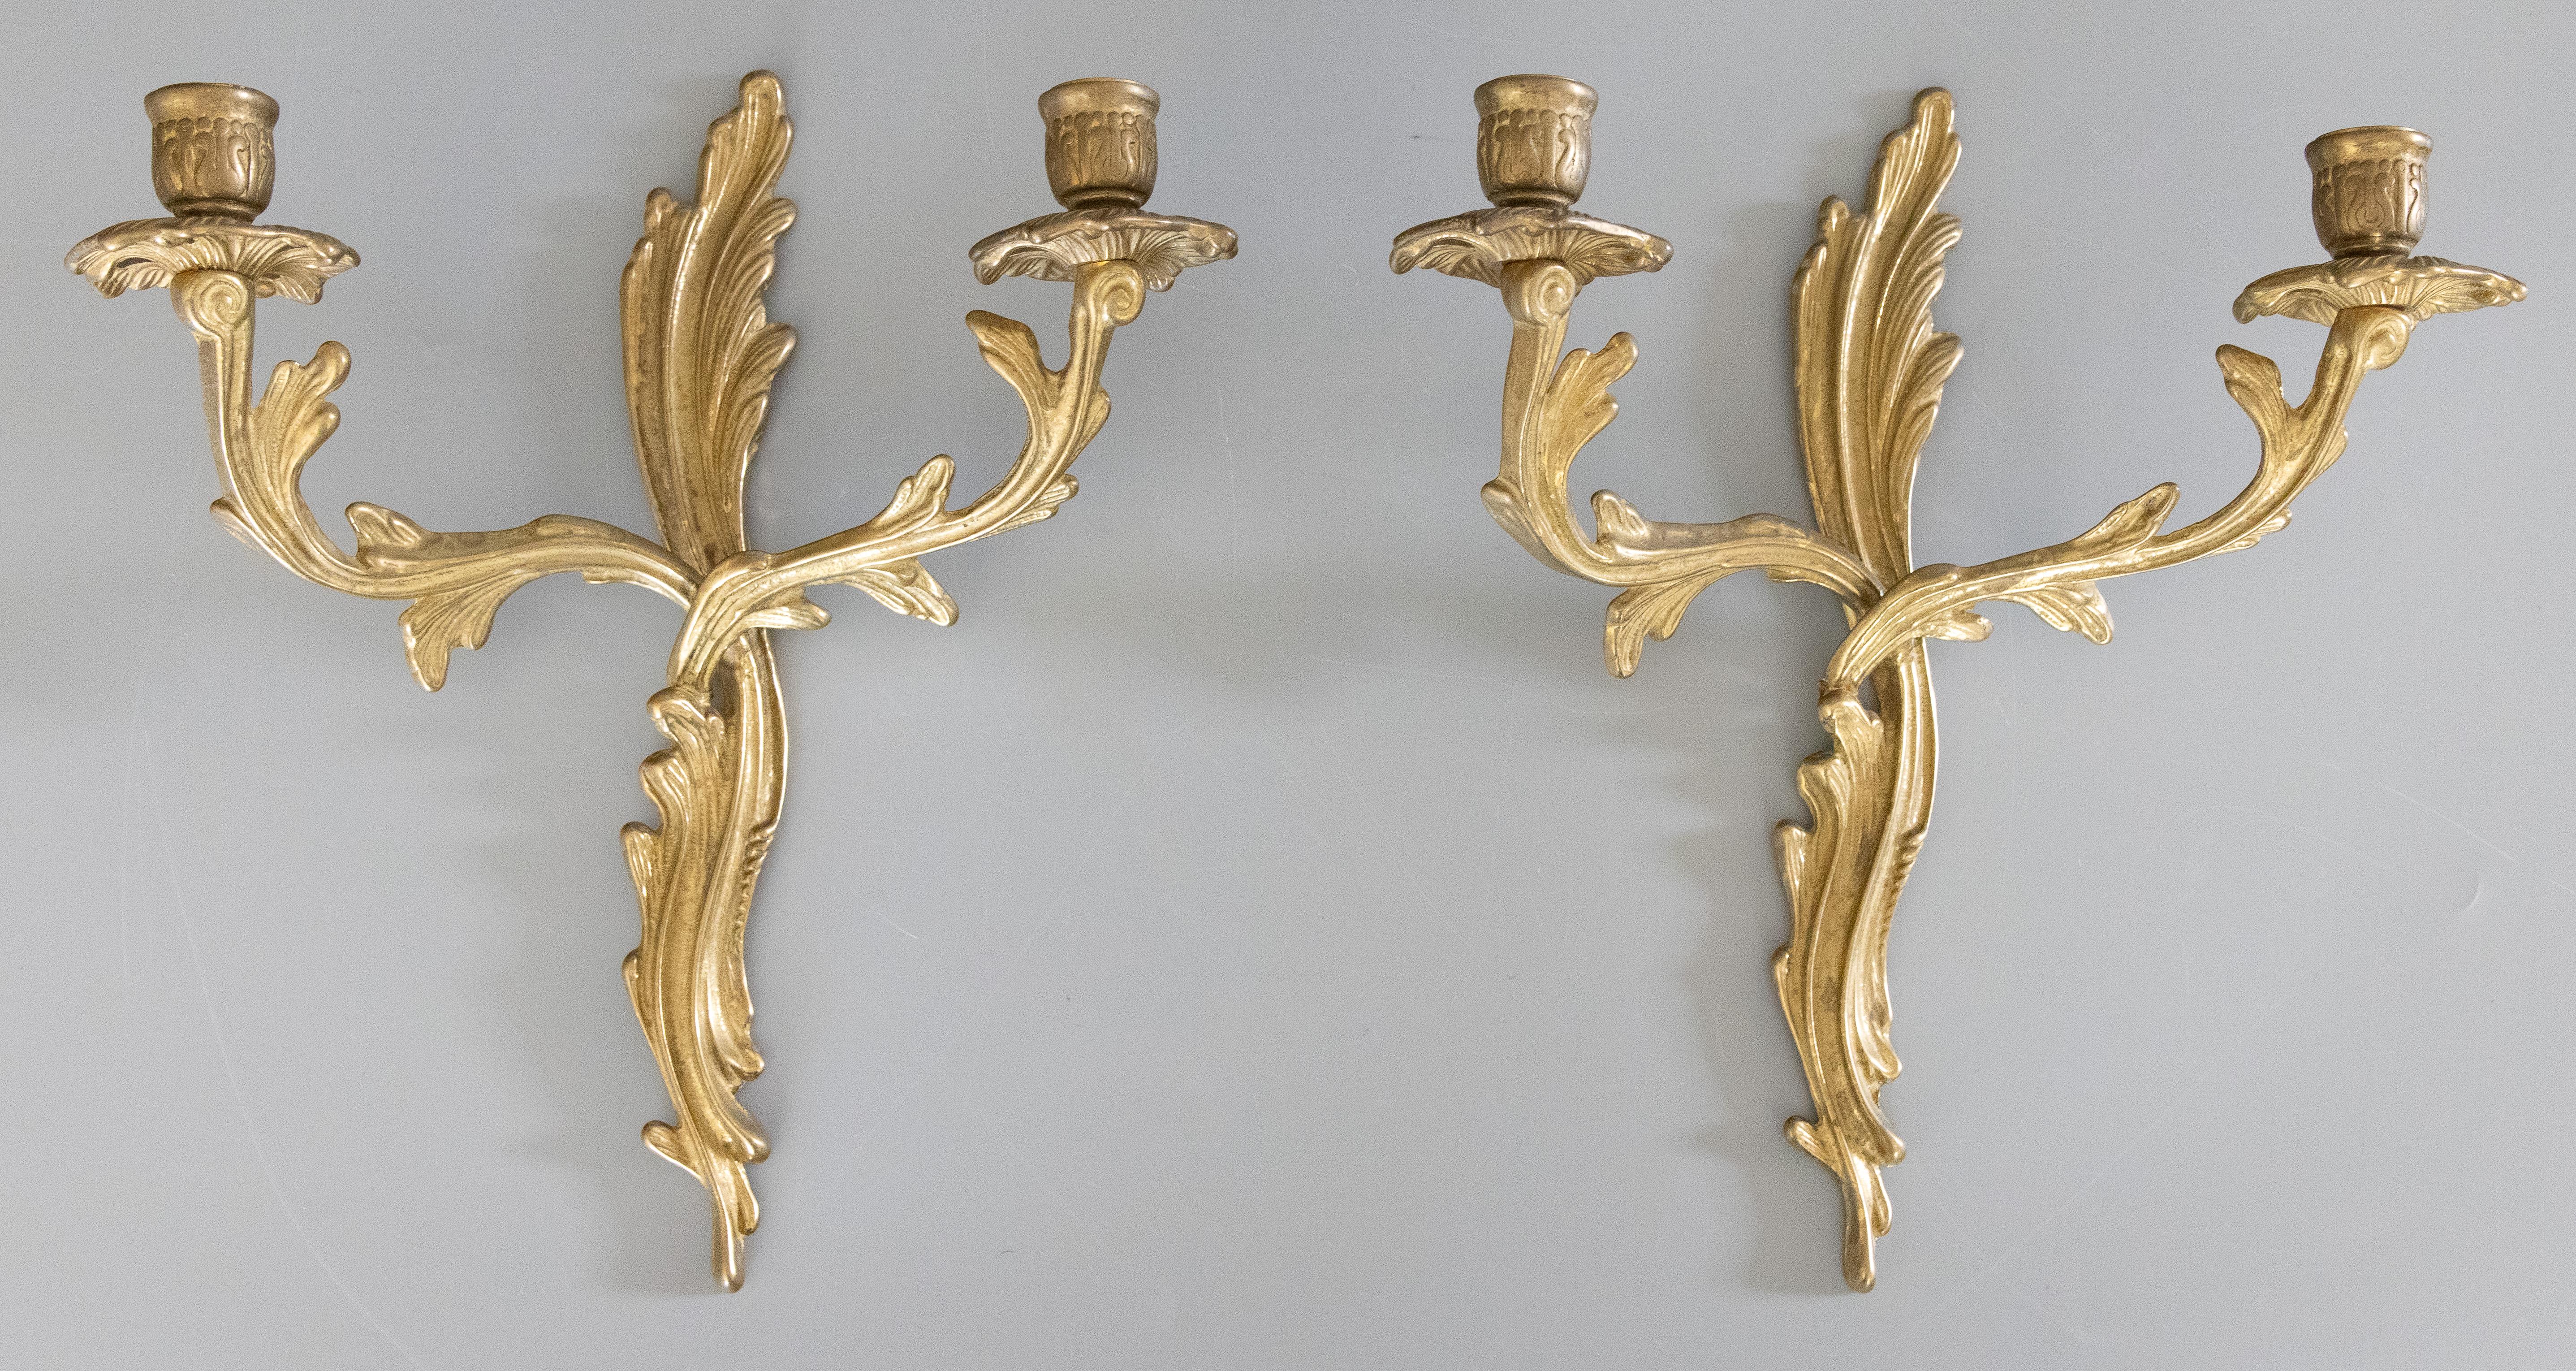 A gorgeous pair of antique French Rococo style gilt brass candelabra two arm candle wall sconces. These beautiful sconces are solid and heavy with gilt scrolls and acanthus leaves in a lovely gilt patina.

DIMENSIONS
11ʺW × 5.25ʺD × 13.25ʺH
